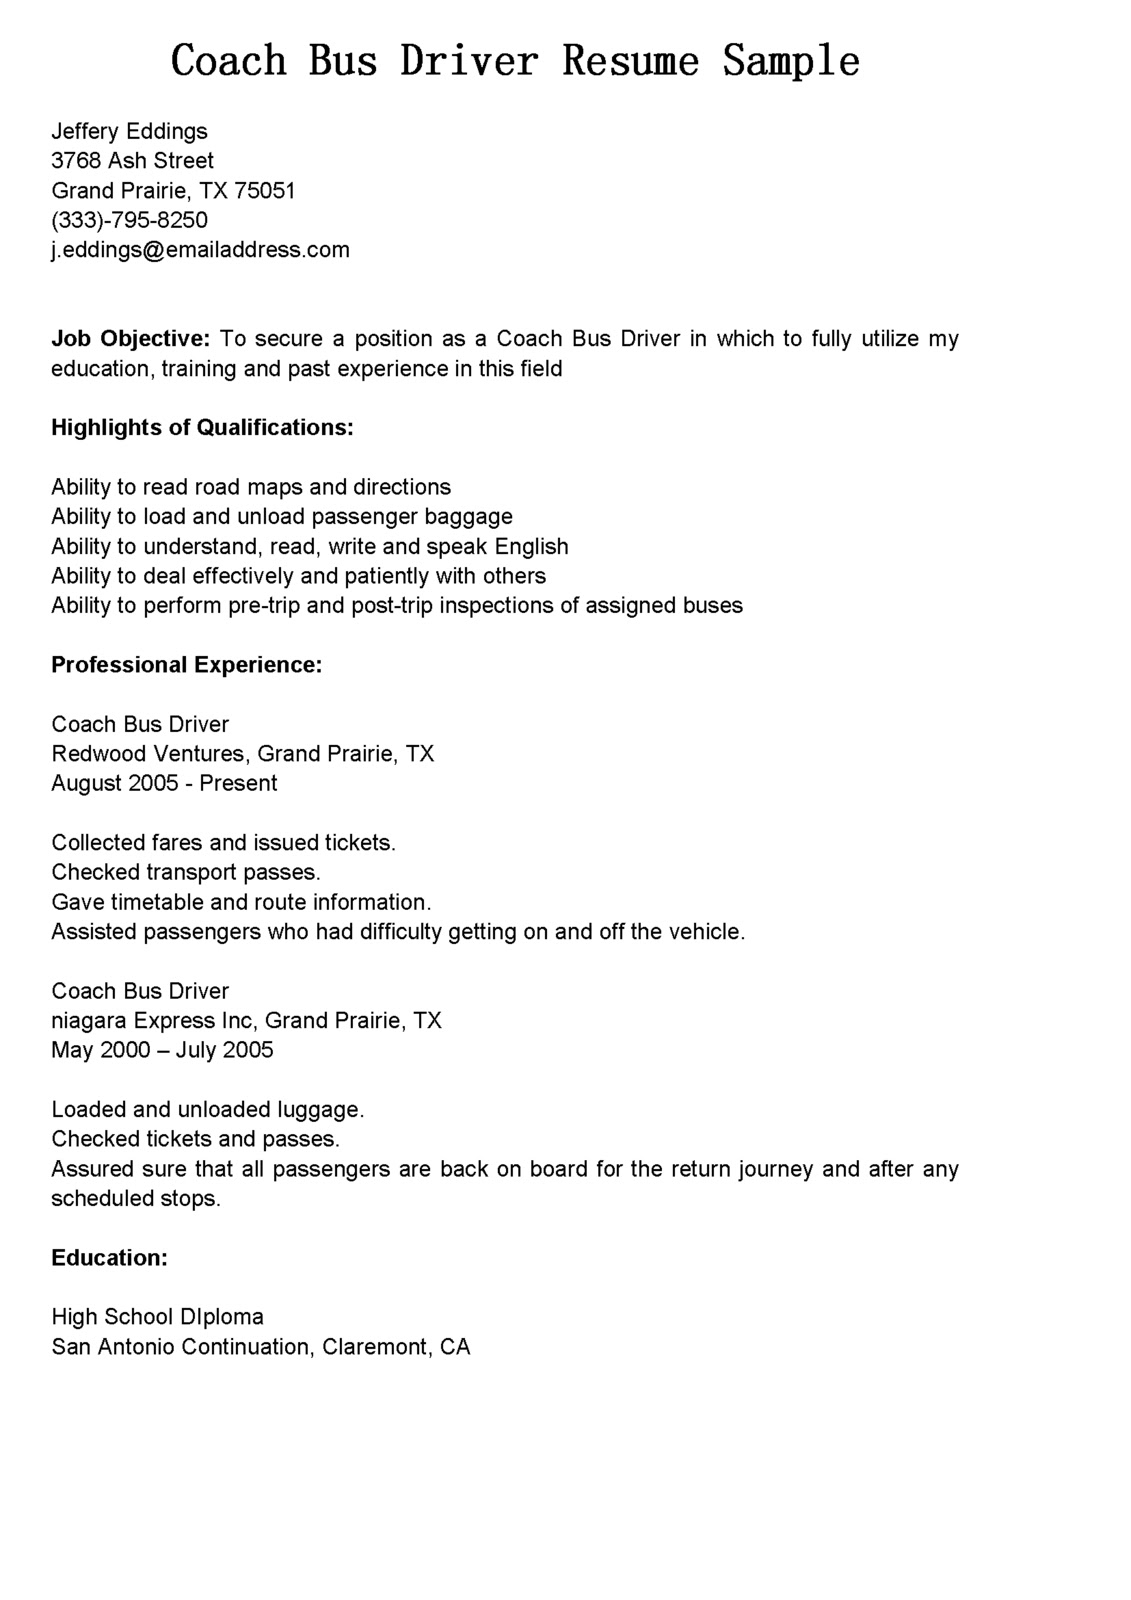 driver resumes  coach bus driver resume sample